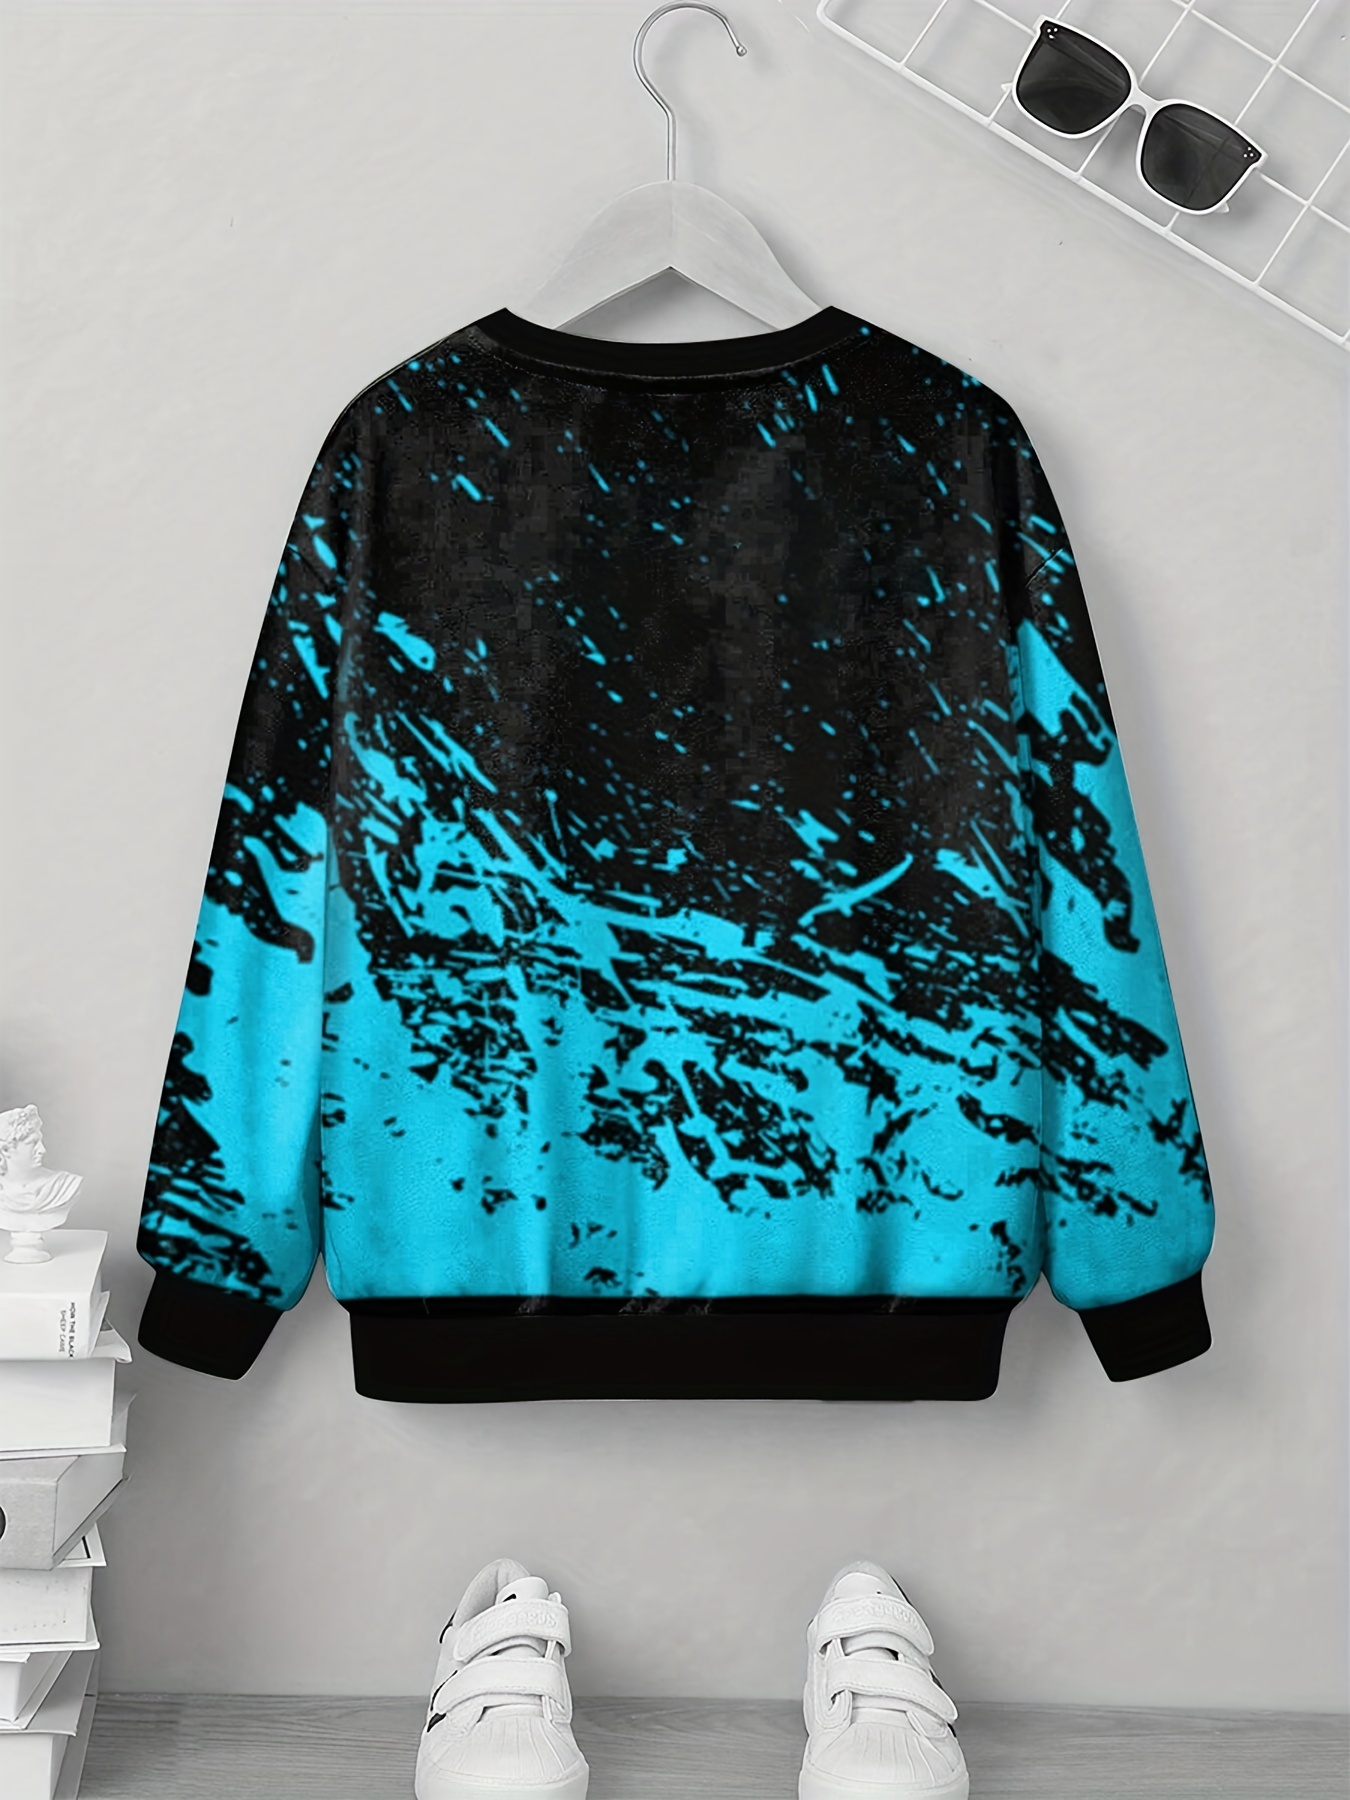 teens 3d color block ice elements print trendy sweatshirt kids casual pullover cool street wear clothes